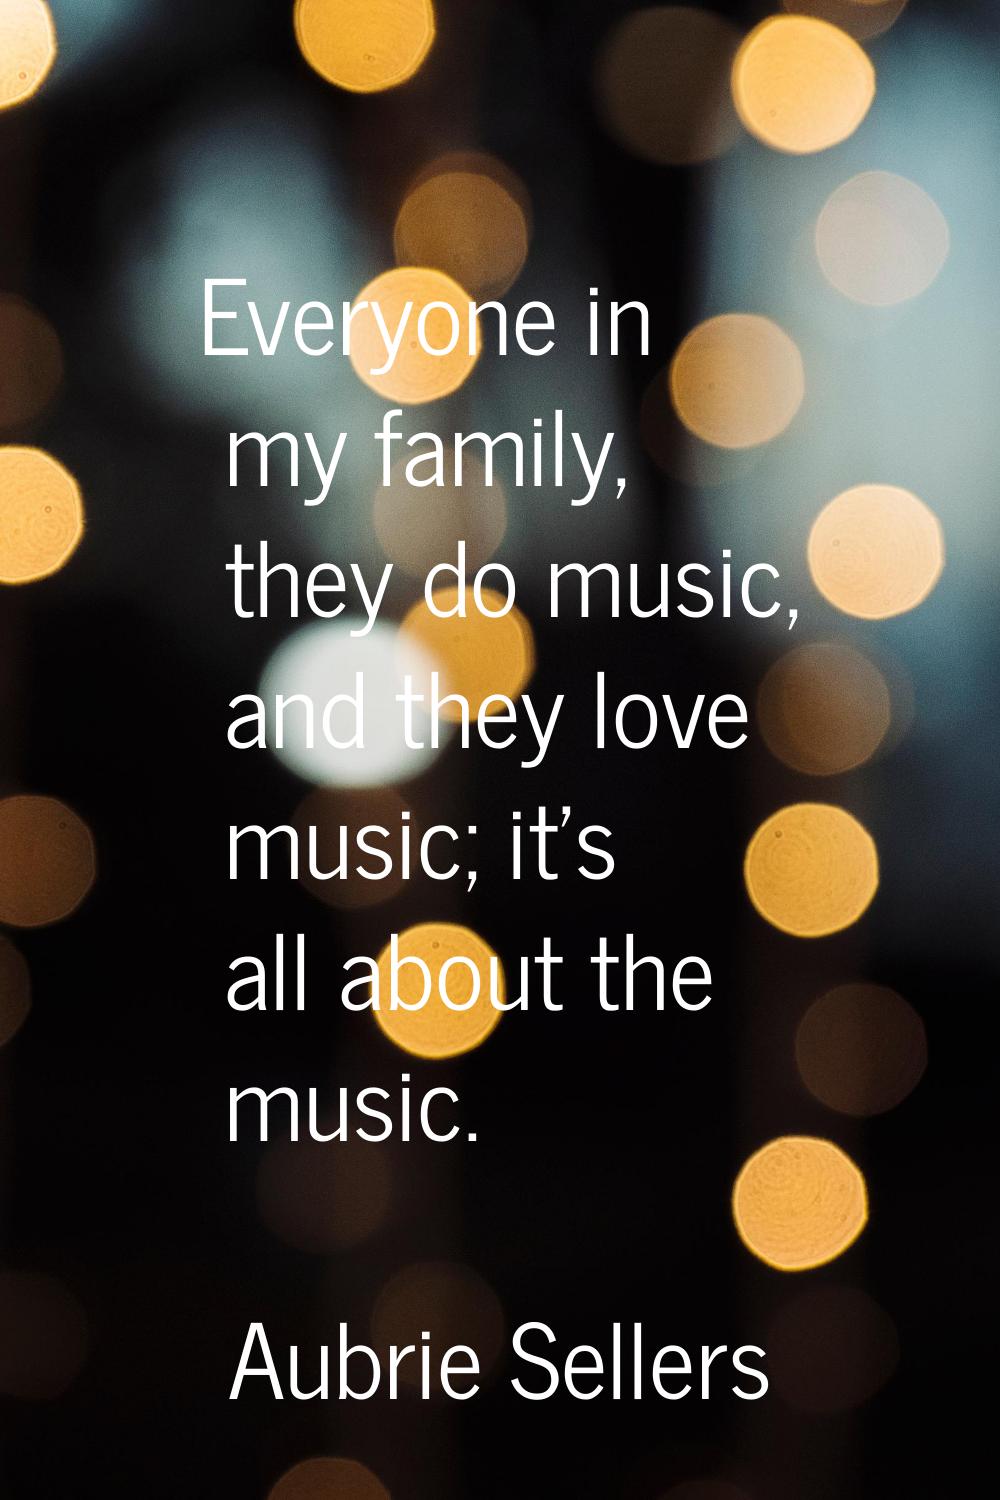 Everyone in my family, they do music, and they love music; it's all about the music.